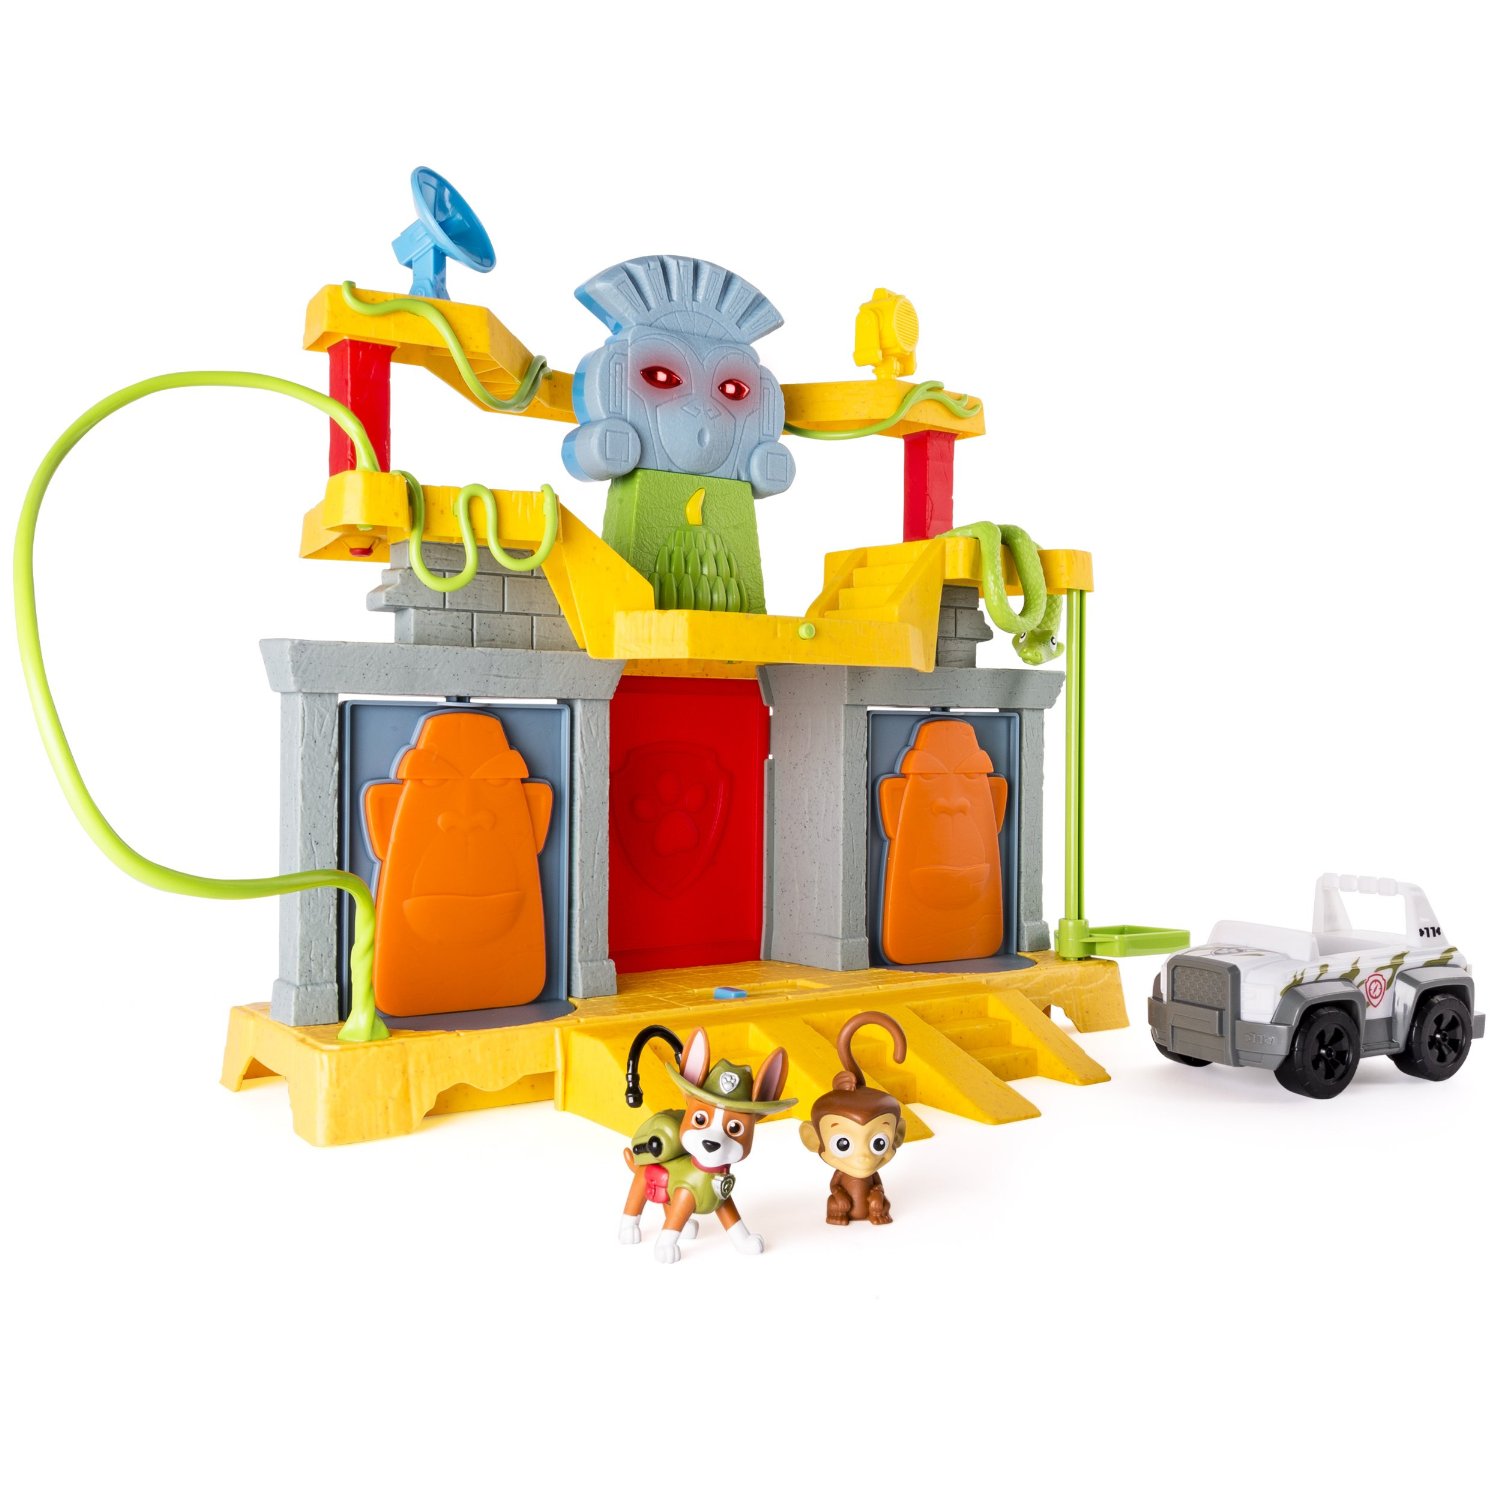 Paw Patrol Monkey Temple Playset - Paw Patrol toy for kids age 3-8 years old